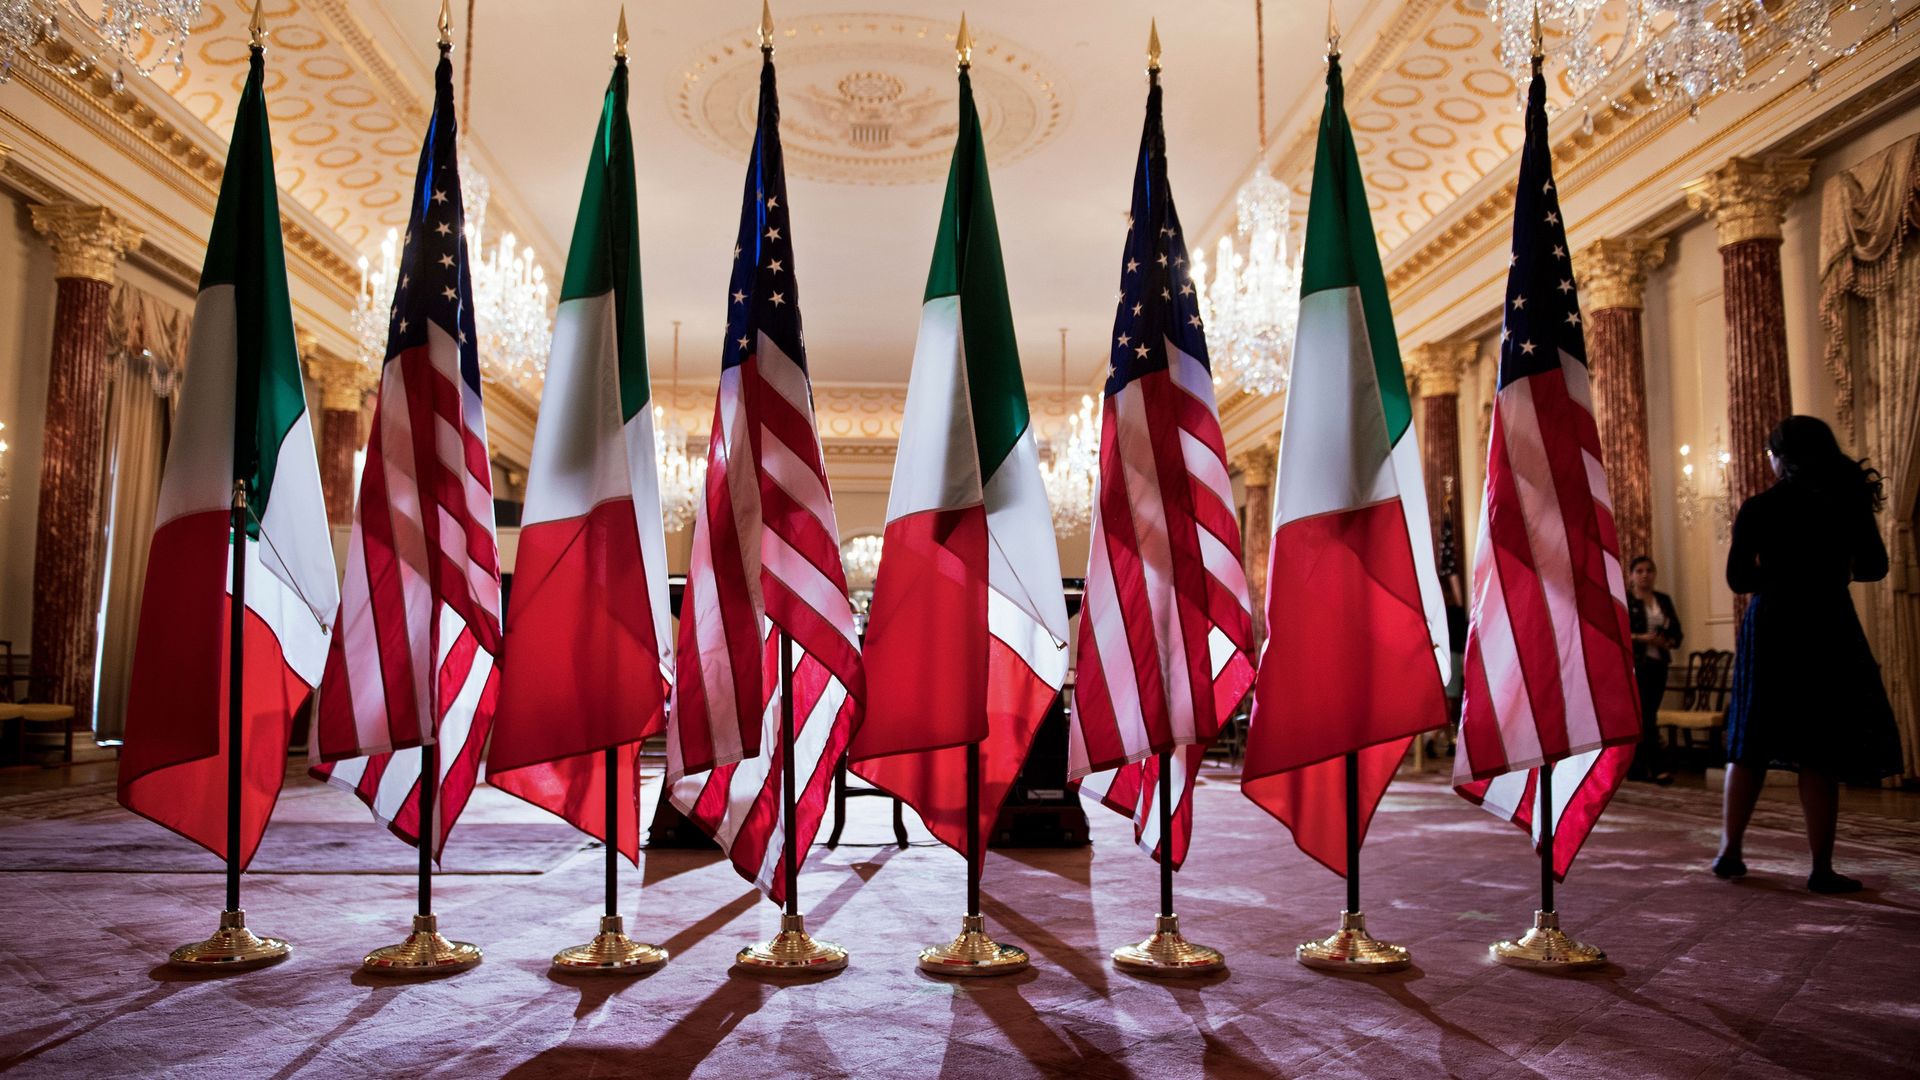 U.S. and Mexico flags stand side-by-side.